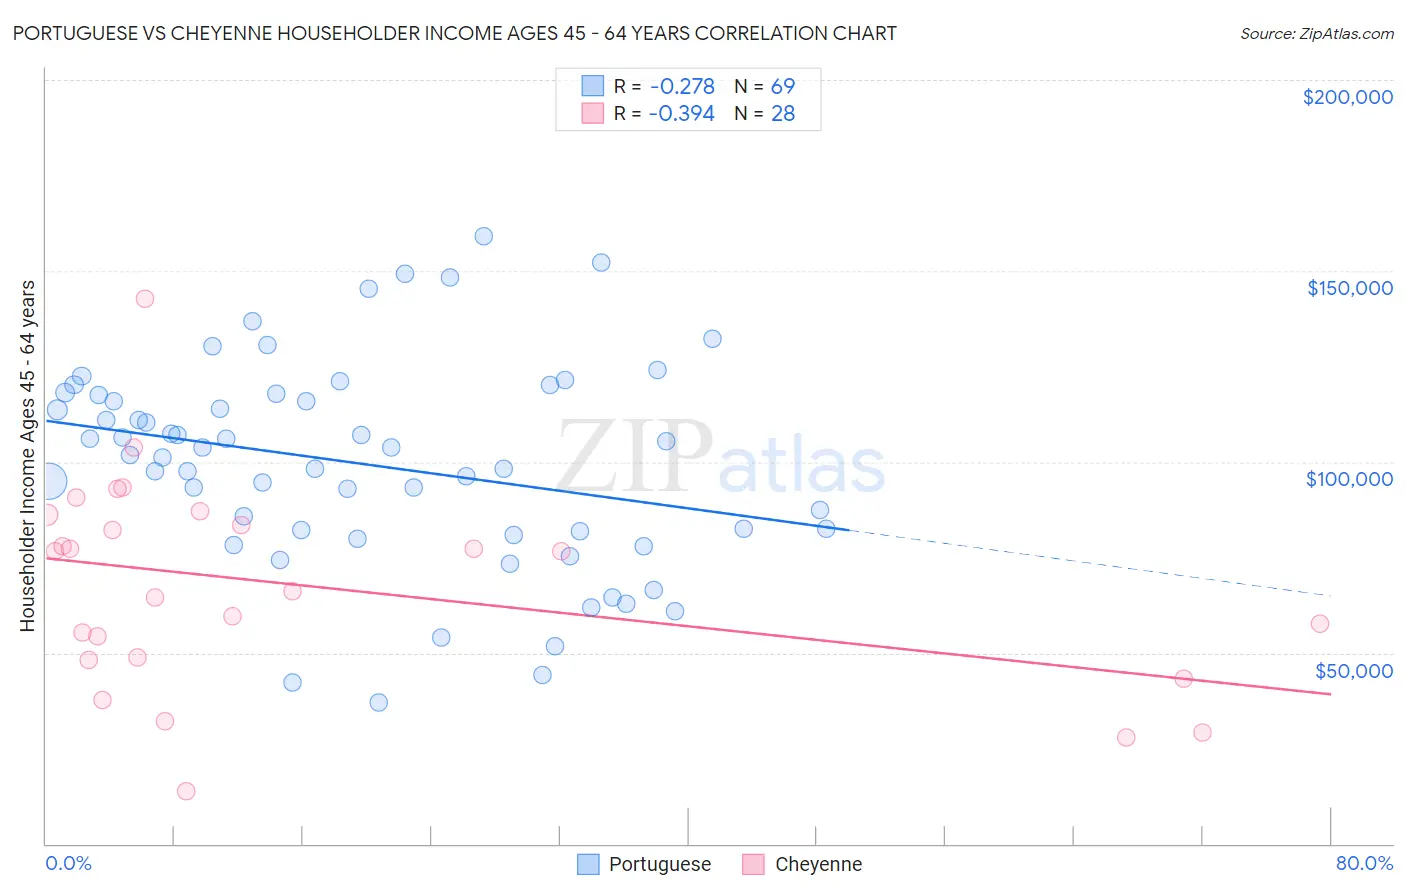 Portuguese vs Cheyenne Householder Income Ages 45 - 64 years